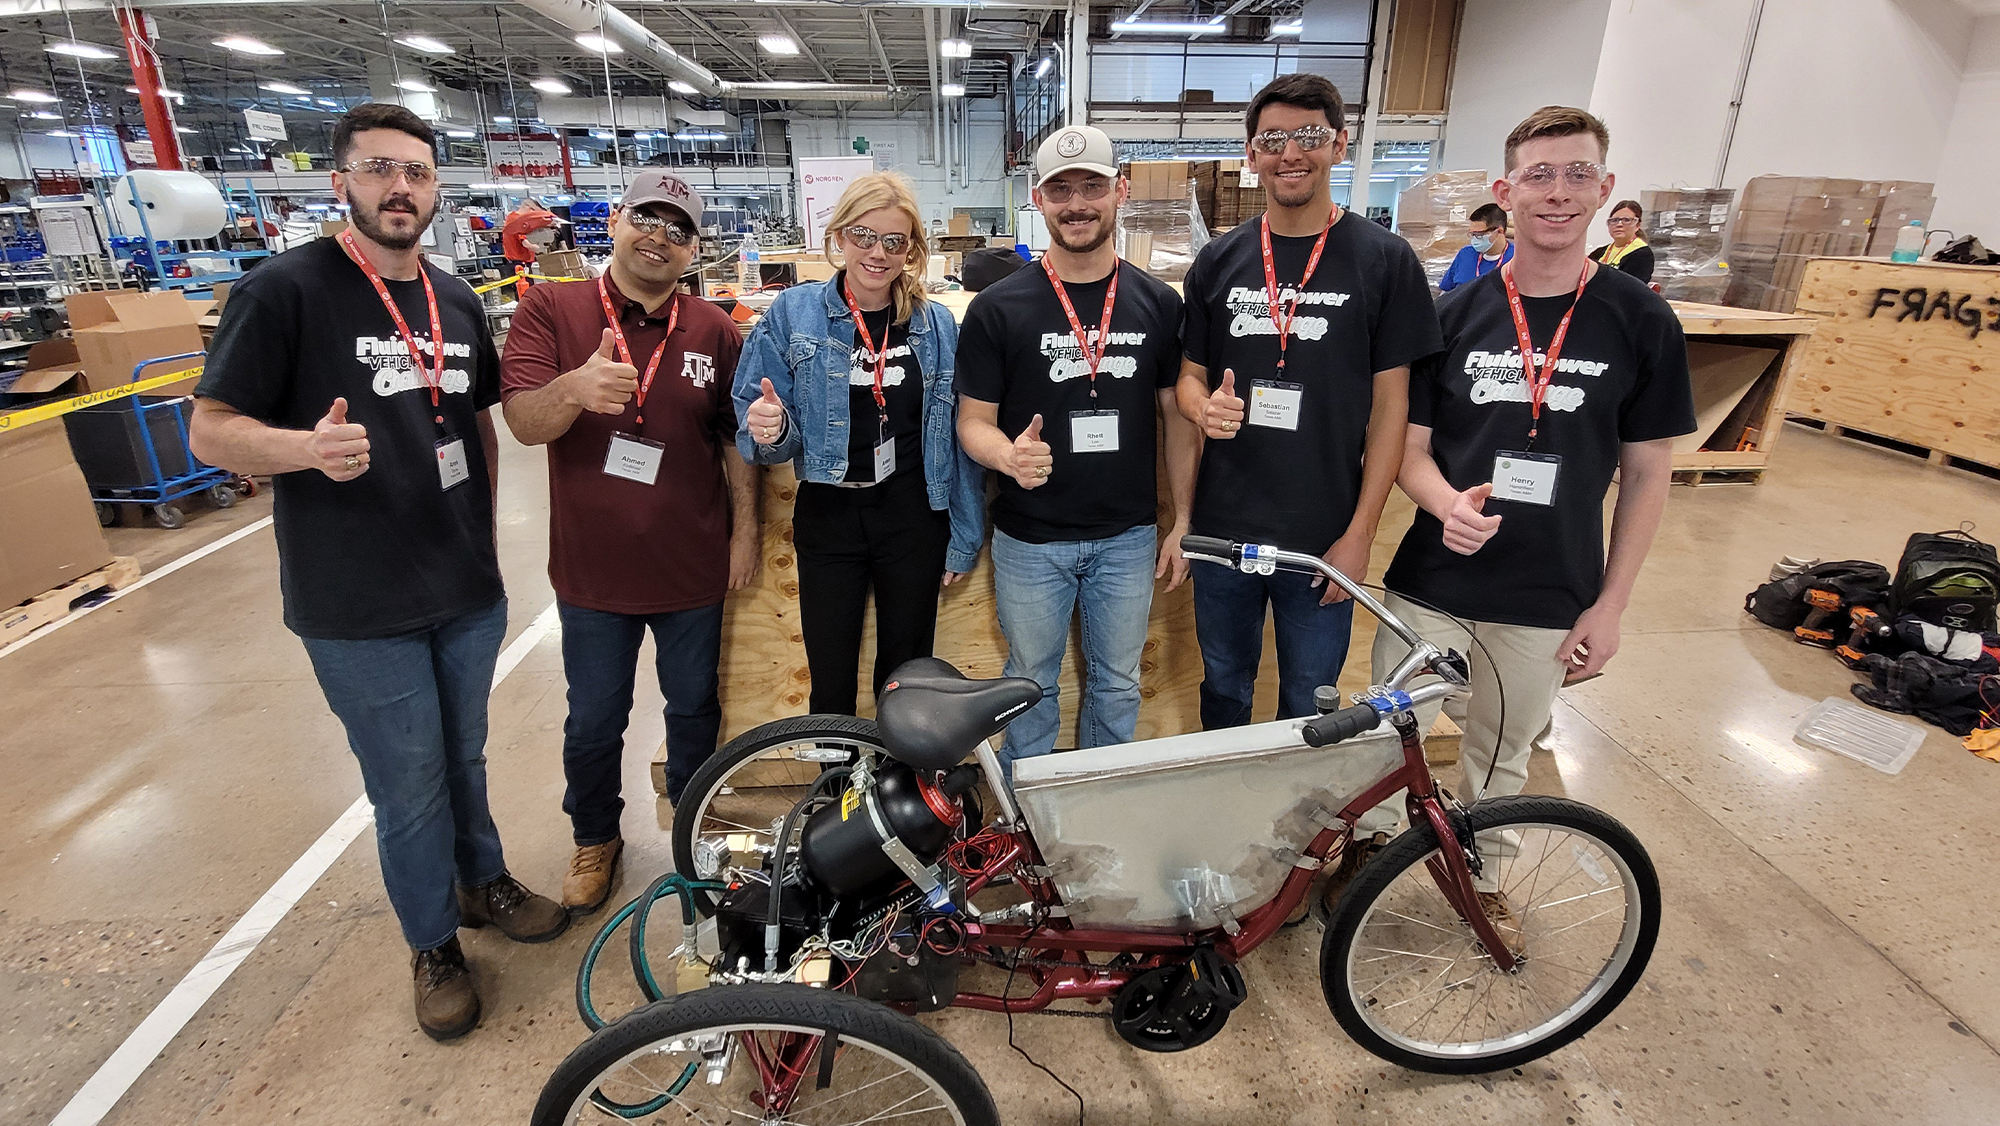 Inside the Norgren facility, the Aggie student team and faculty supervisor Dr. Ahmed Abdelaal give the thumbs-up sign. In the foreground is the tricycle the team designed for the Fluid Power Vehicle Challenge. 